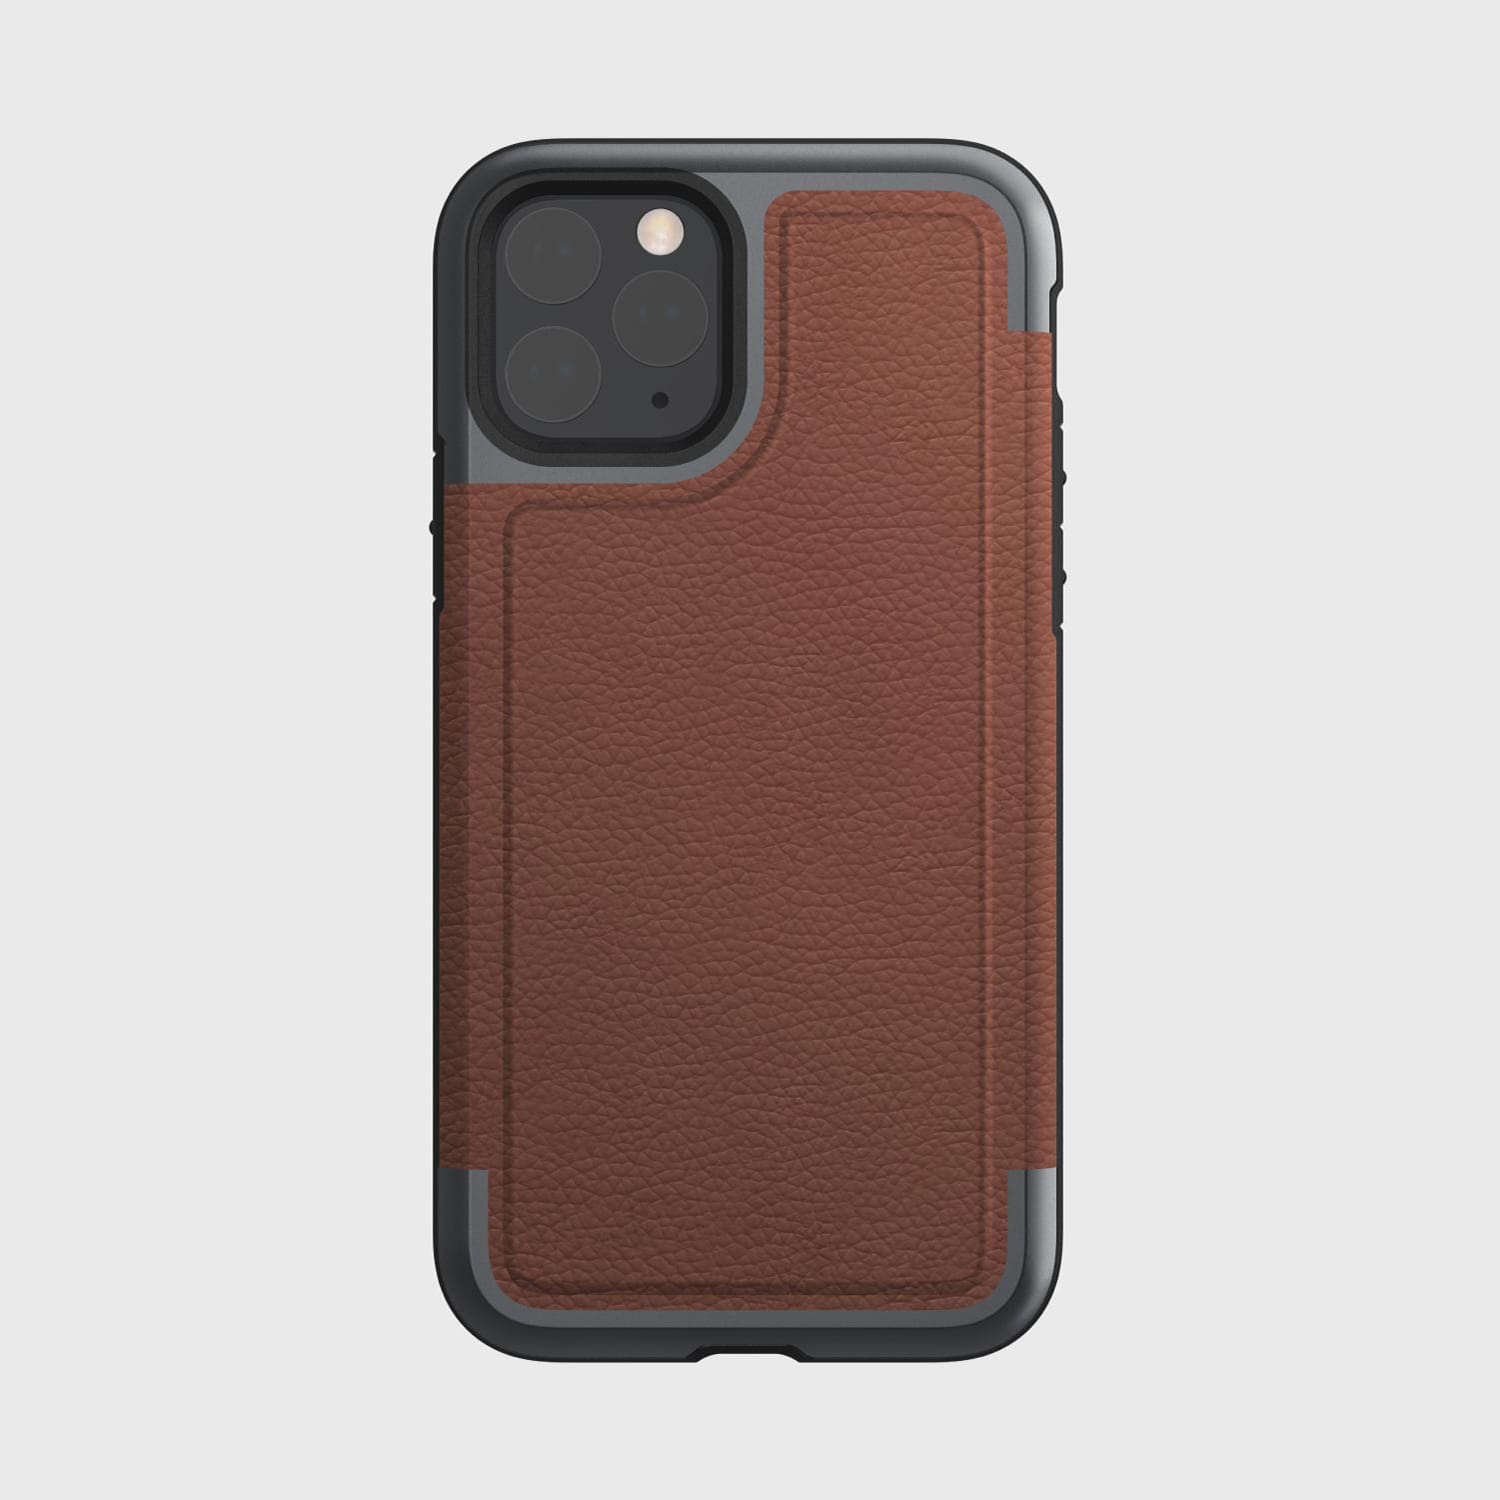 A protective PRIME brown leather case for the iPhone 11 pro by Raptic.